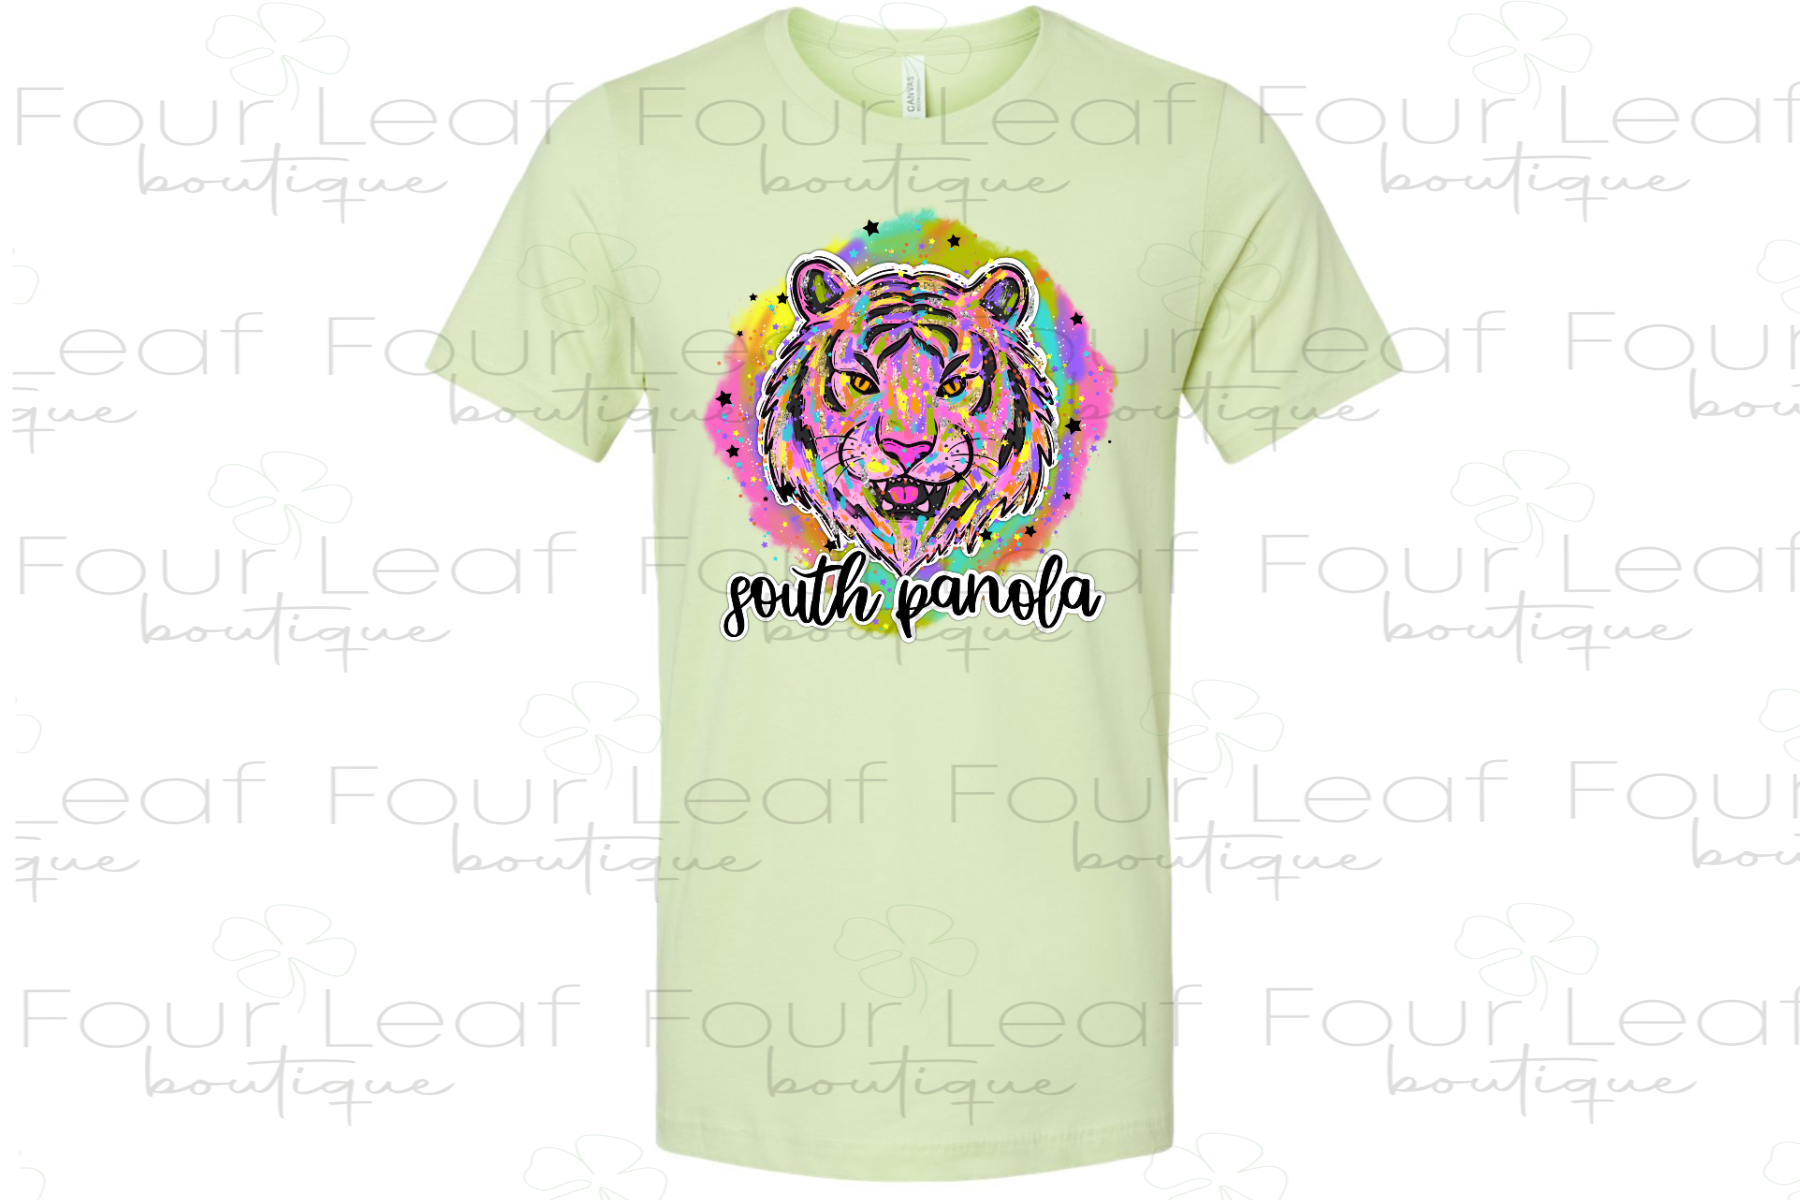 South Panola-90's Nostalgia- BELLA + CANVAS LISTING. Youth sizes available